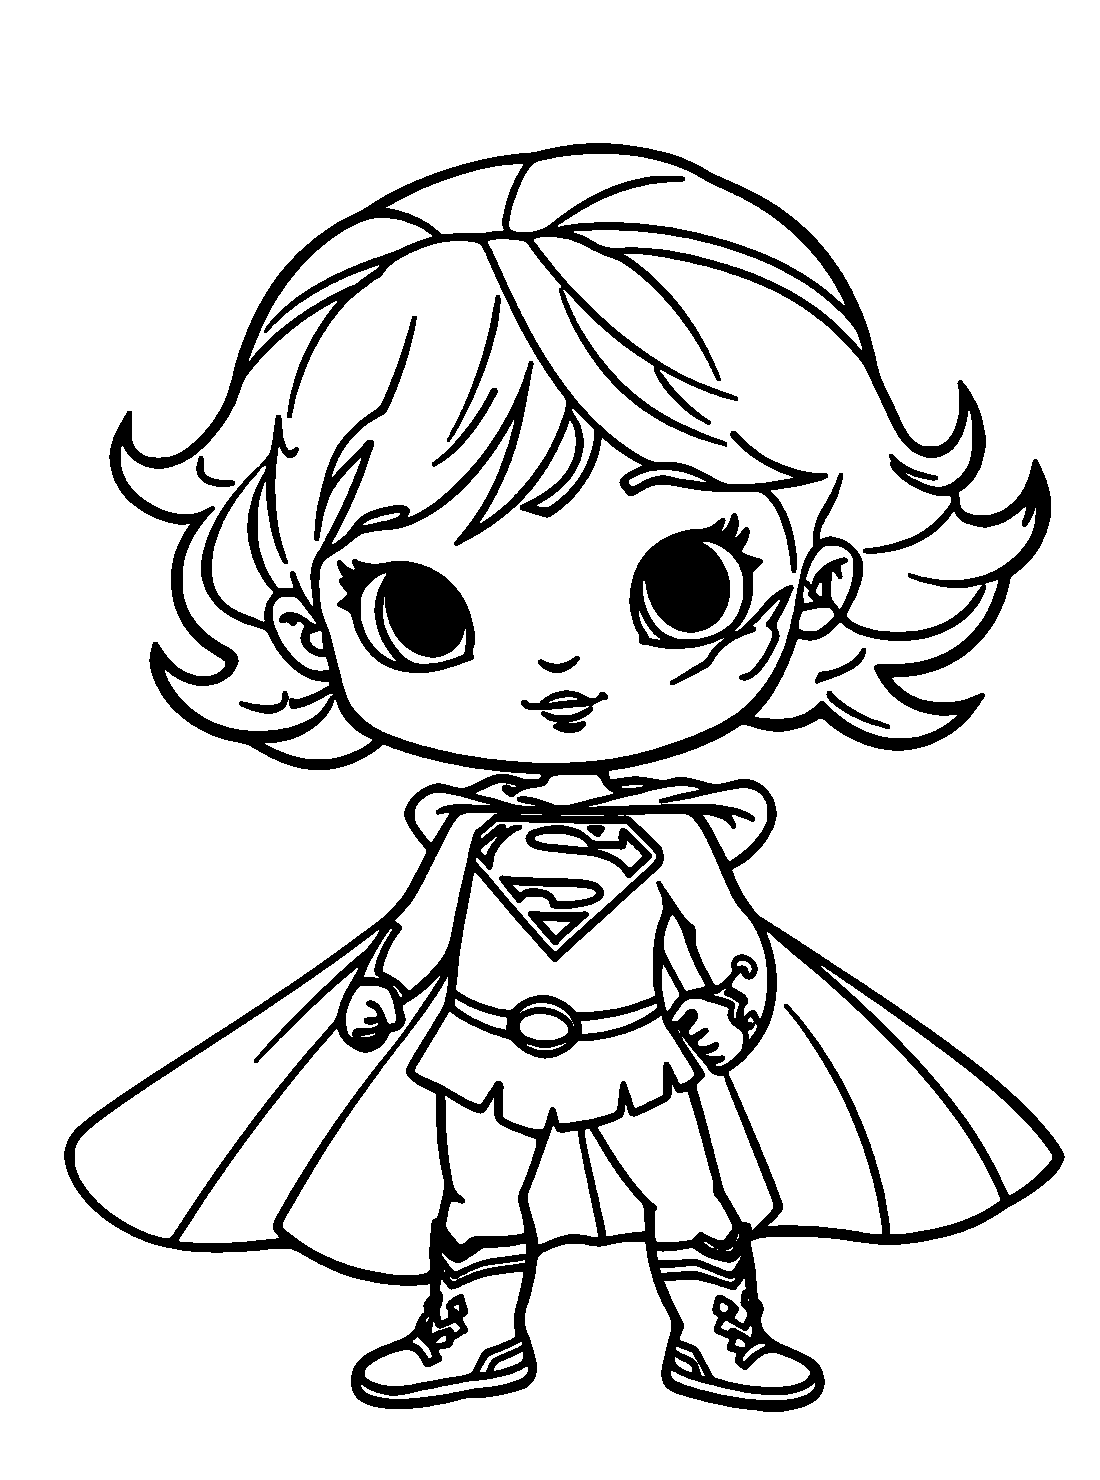 Supergirl Coloring Pages Online For Kids!